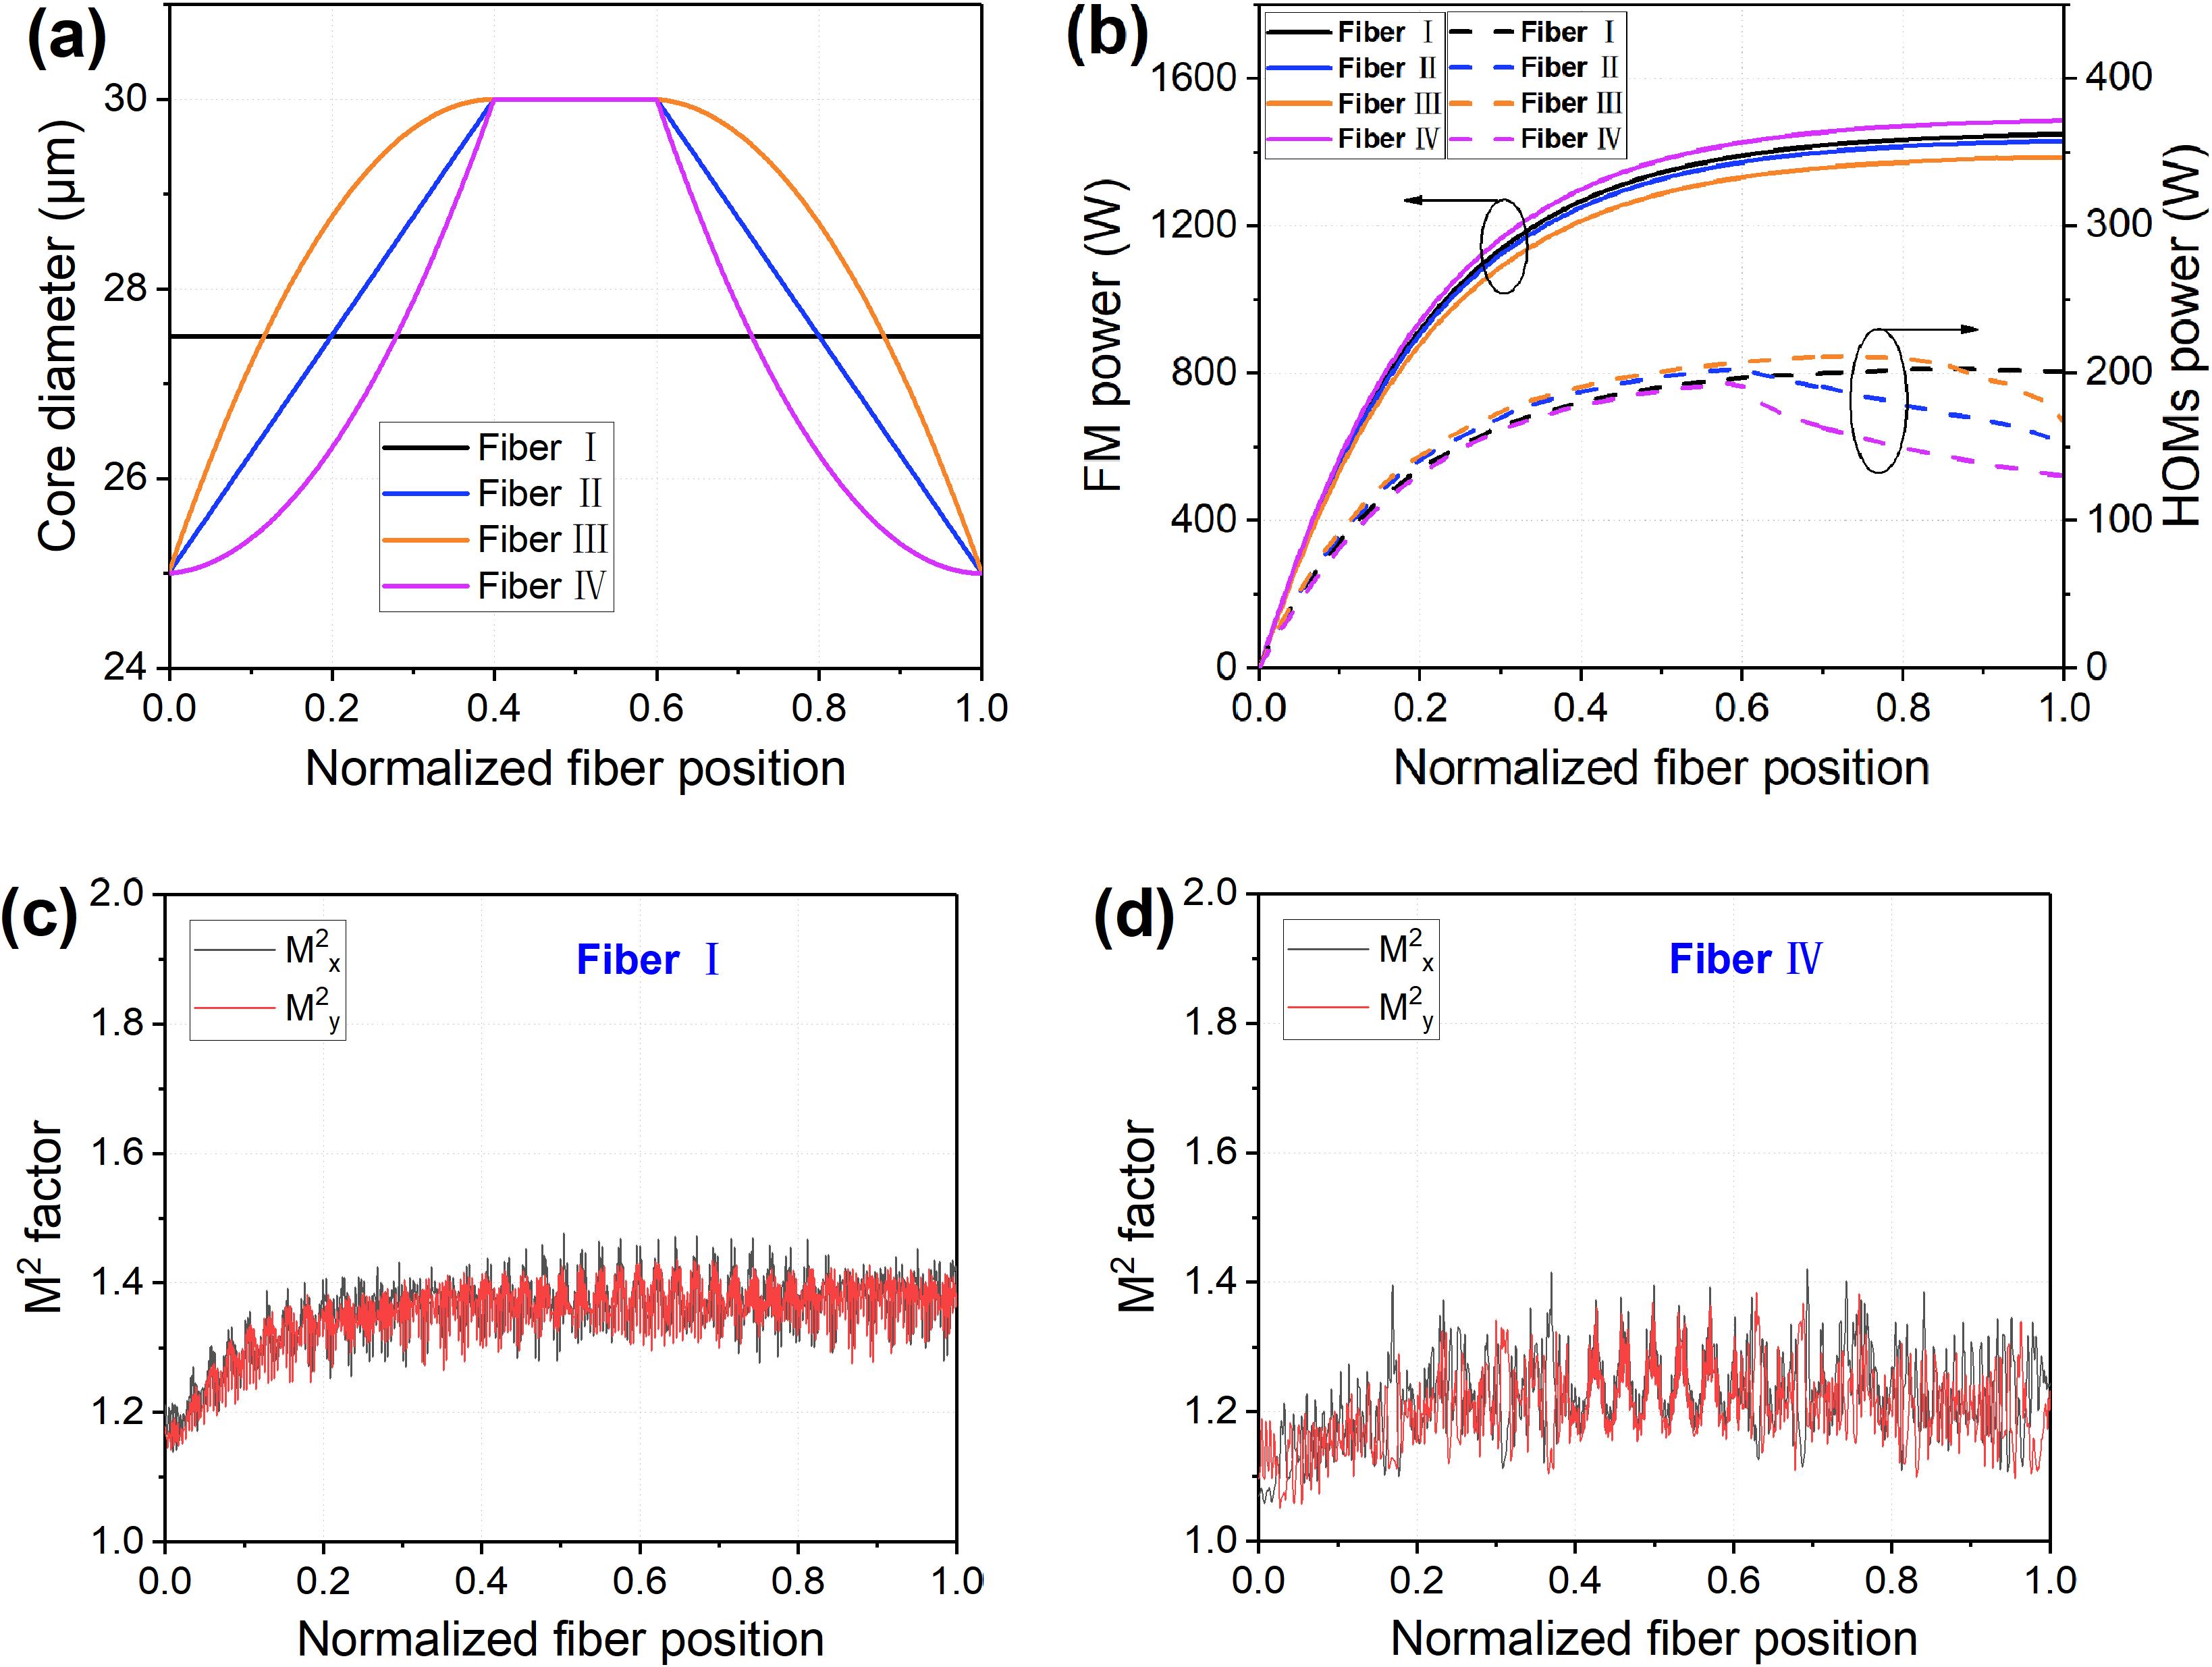 Simulation results of four types of fiber: (a) the core dimeter distribution, (b) FM power and HOM power (solid line, FM power distribution in fiber; dotted line, HOMs power distribution in fiber), (c) M2 factor evolution of Fiber I and (d) M2 factor evolution of Fiber IV.